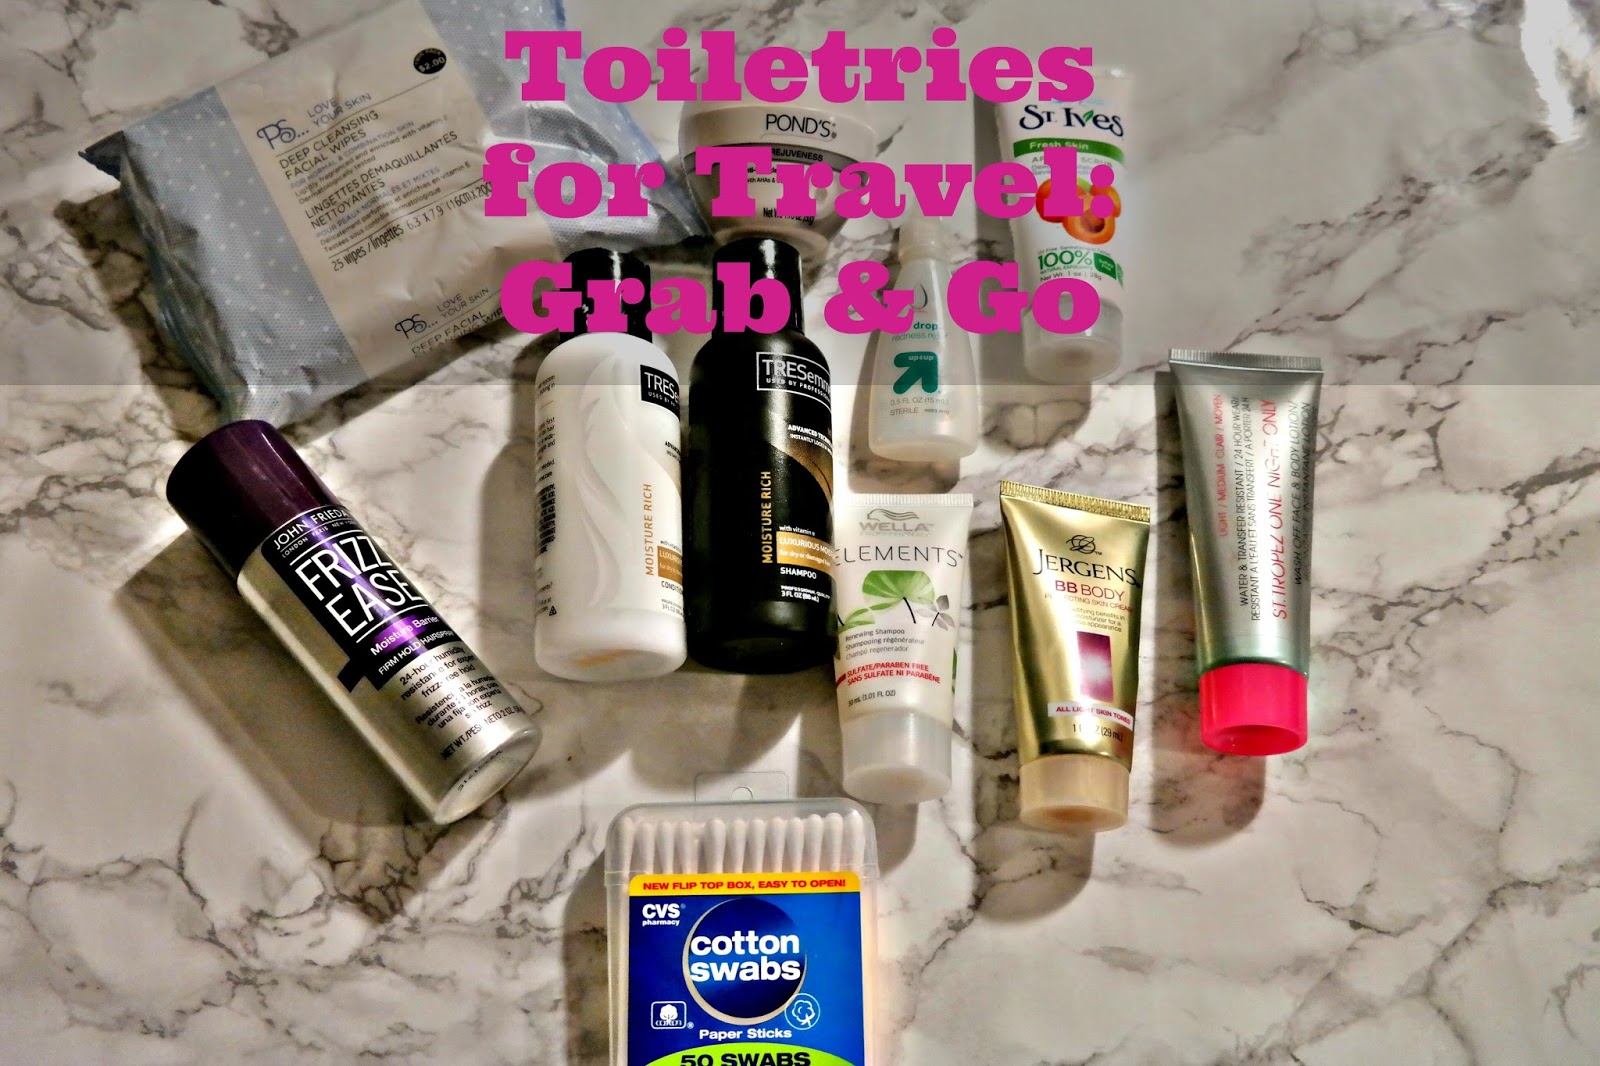 Toiletries to grab and go